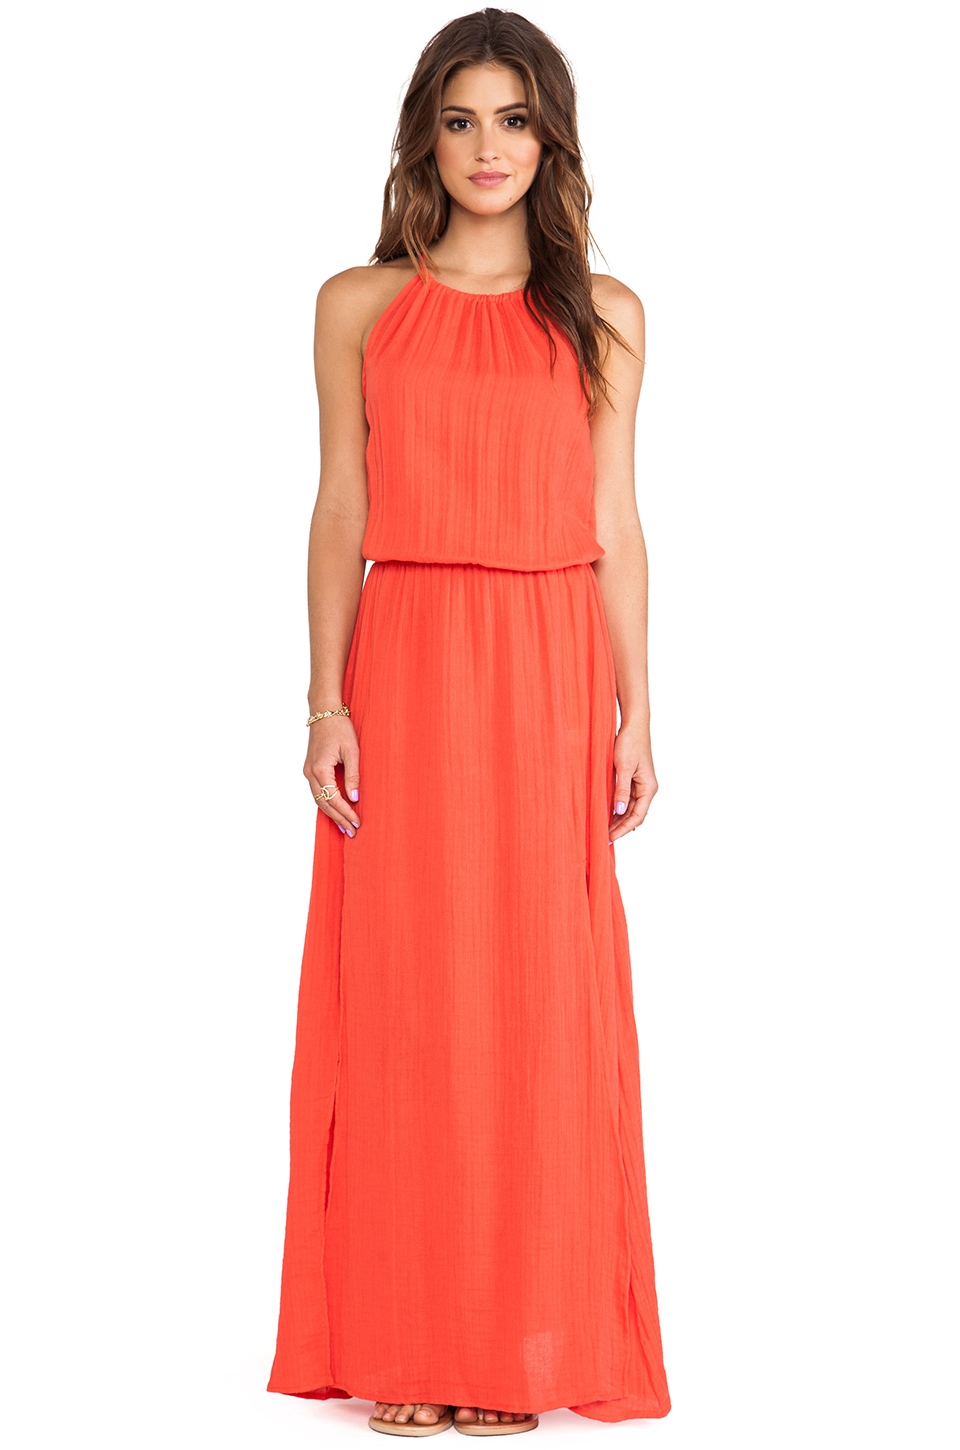 Lyst - Michael Stars Double Slit Maxi Dress in Red